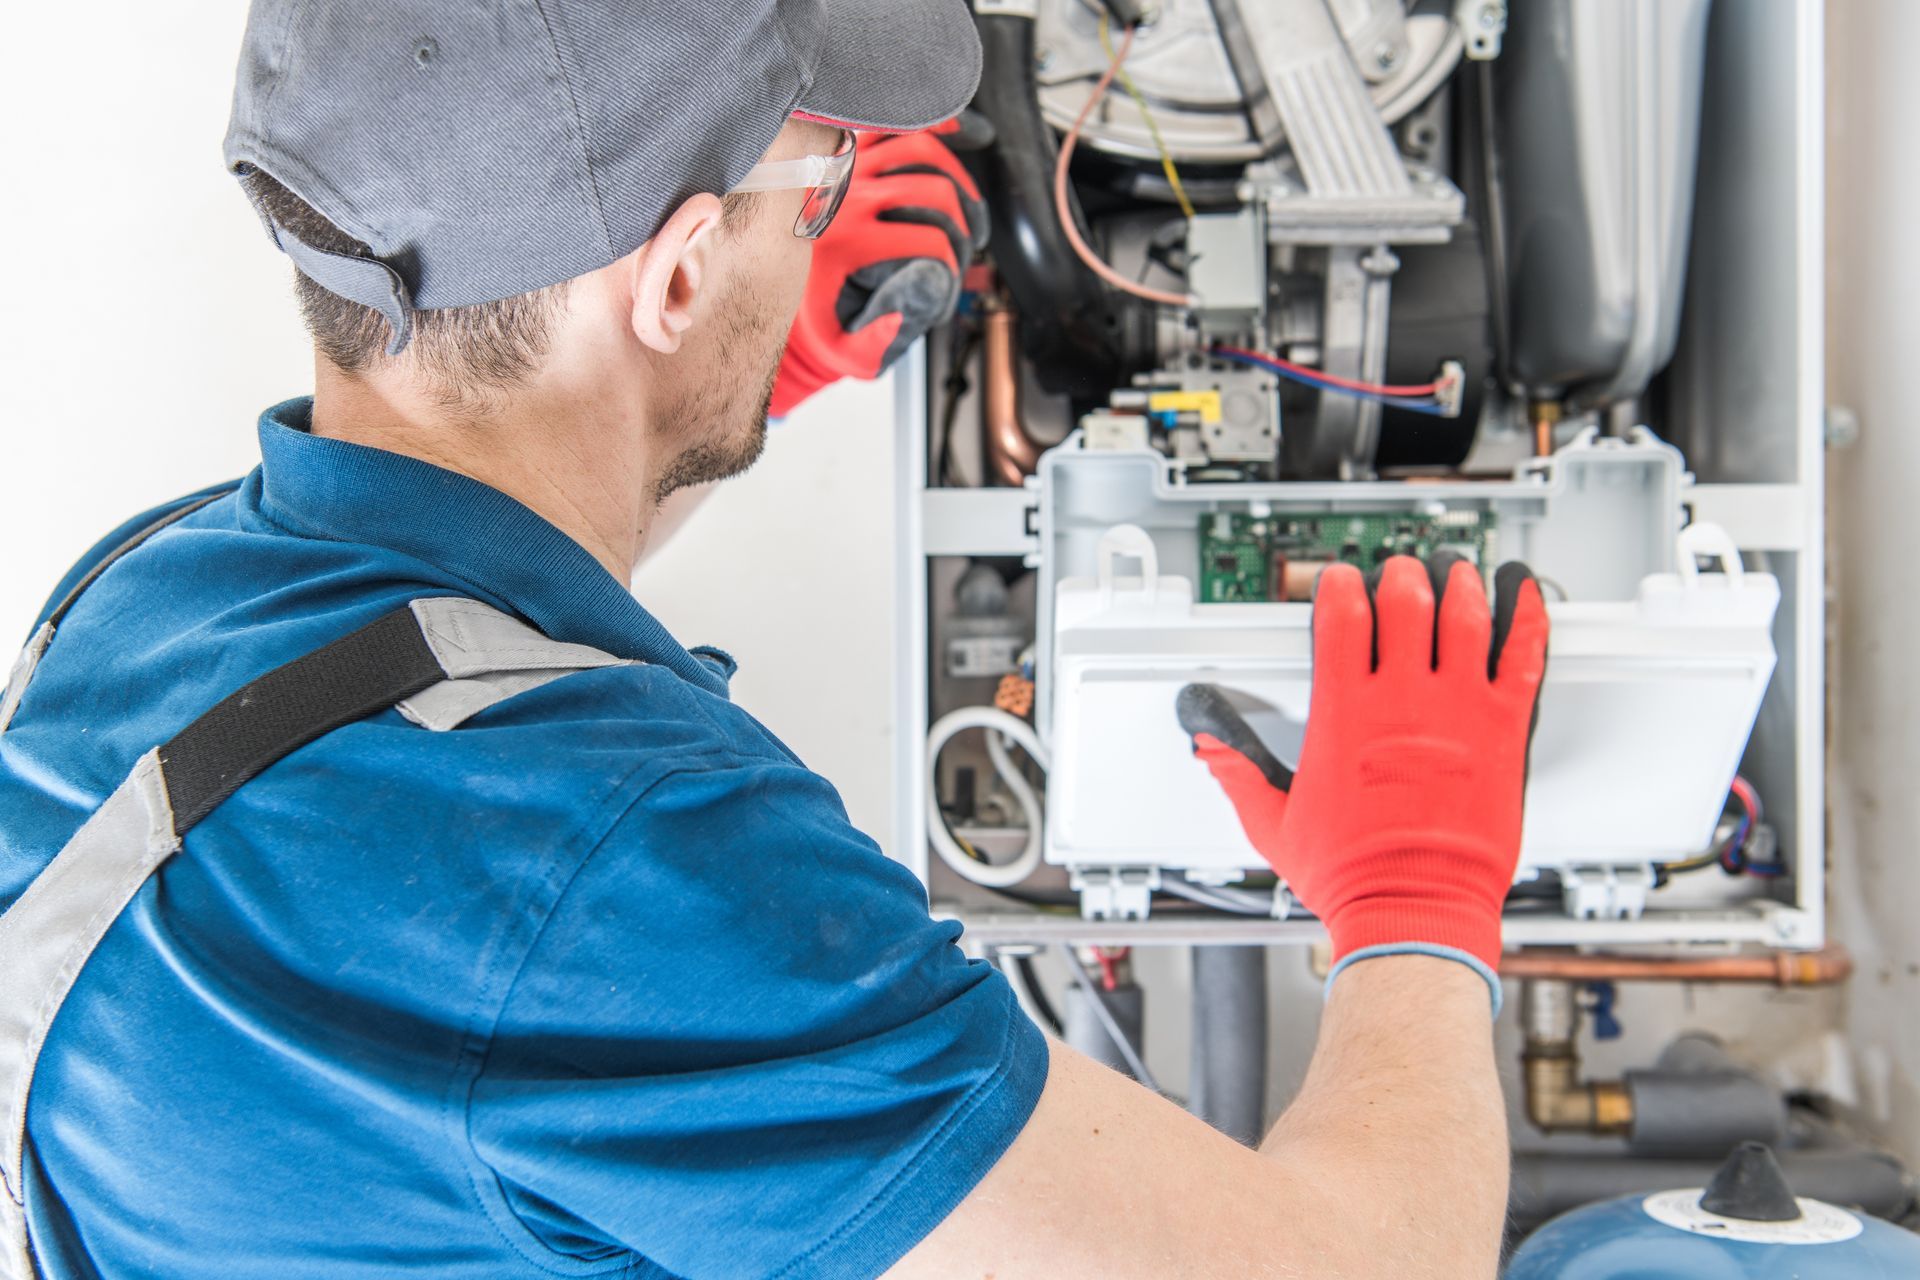 An expert technician in a blue uniform performing furnace repair, carefully inspecting and repairing the internal components of a residential furnace.